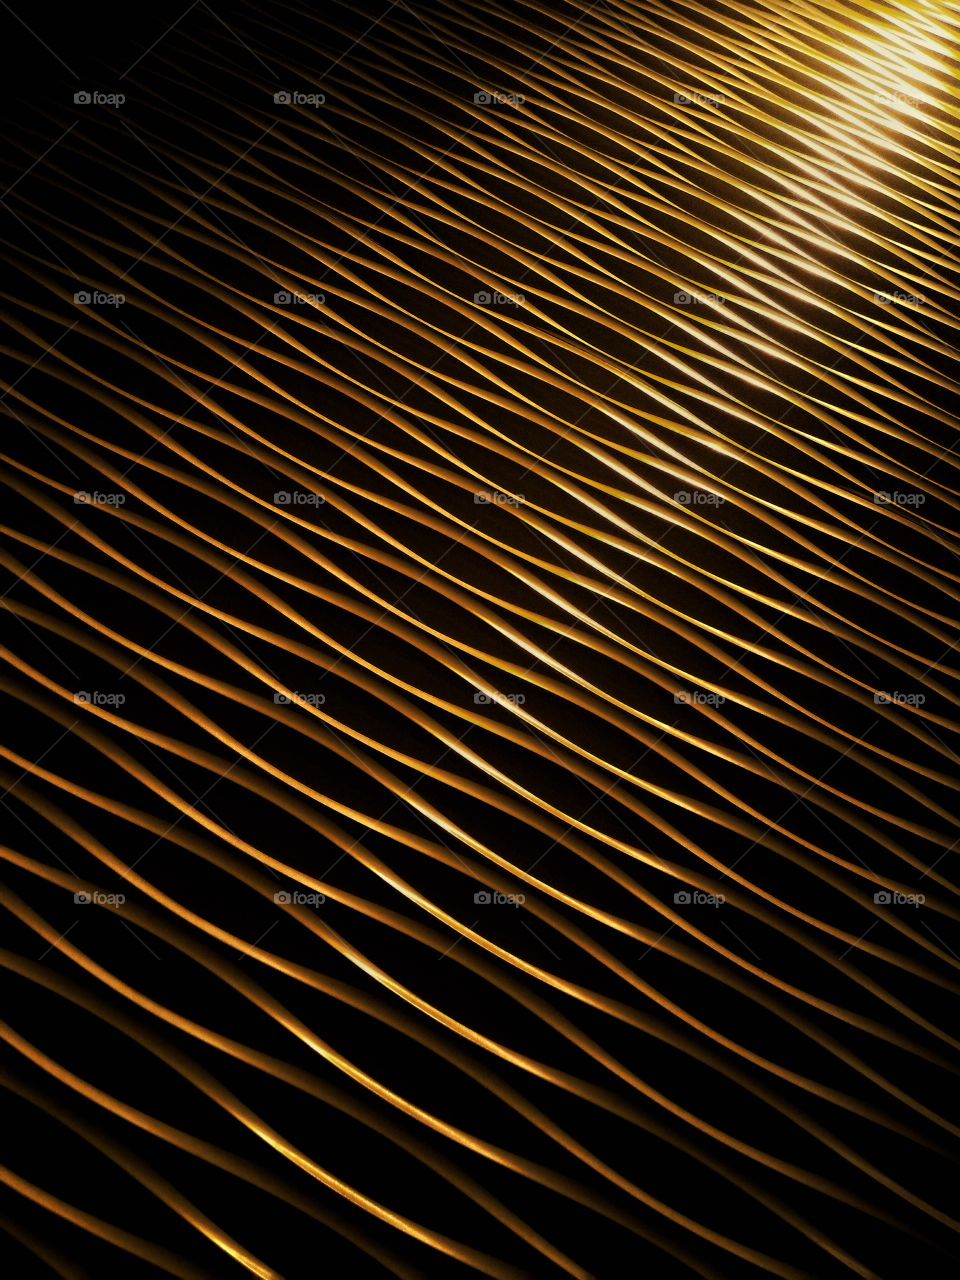 The sinuous lines wall design